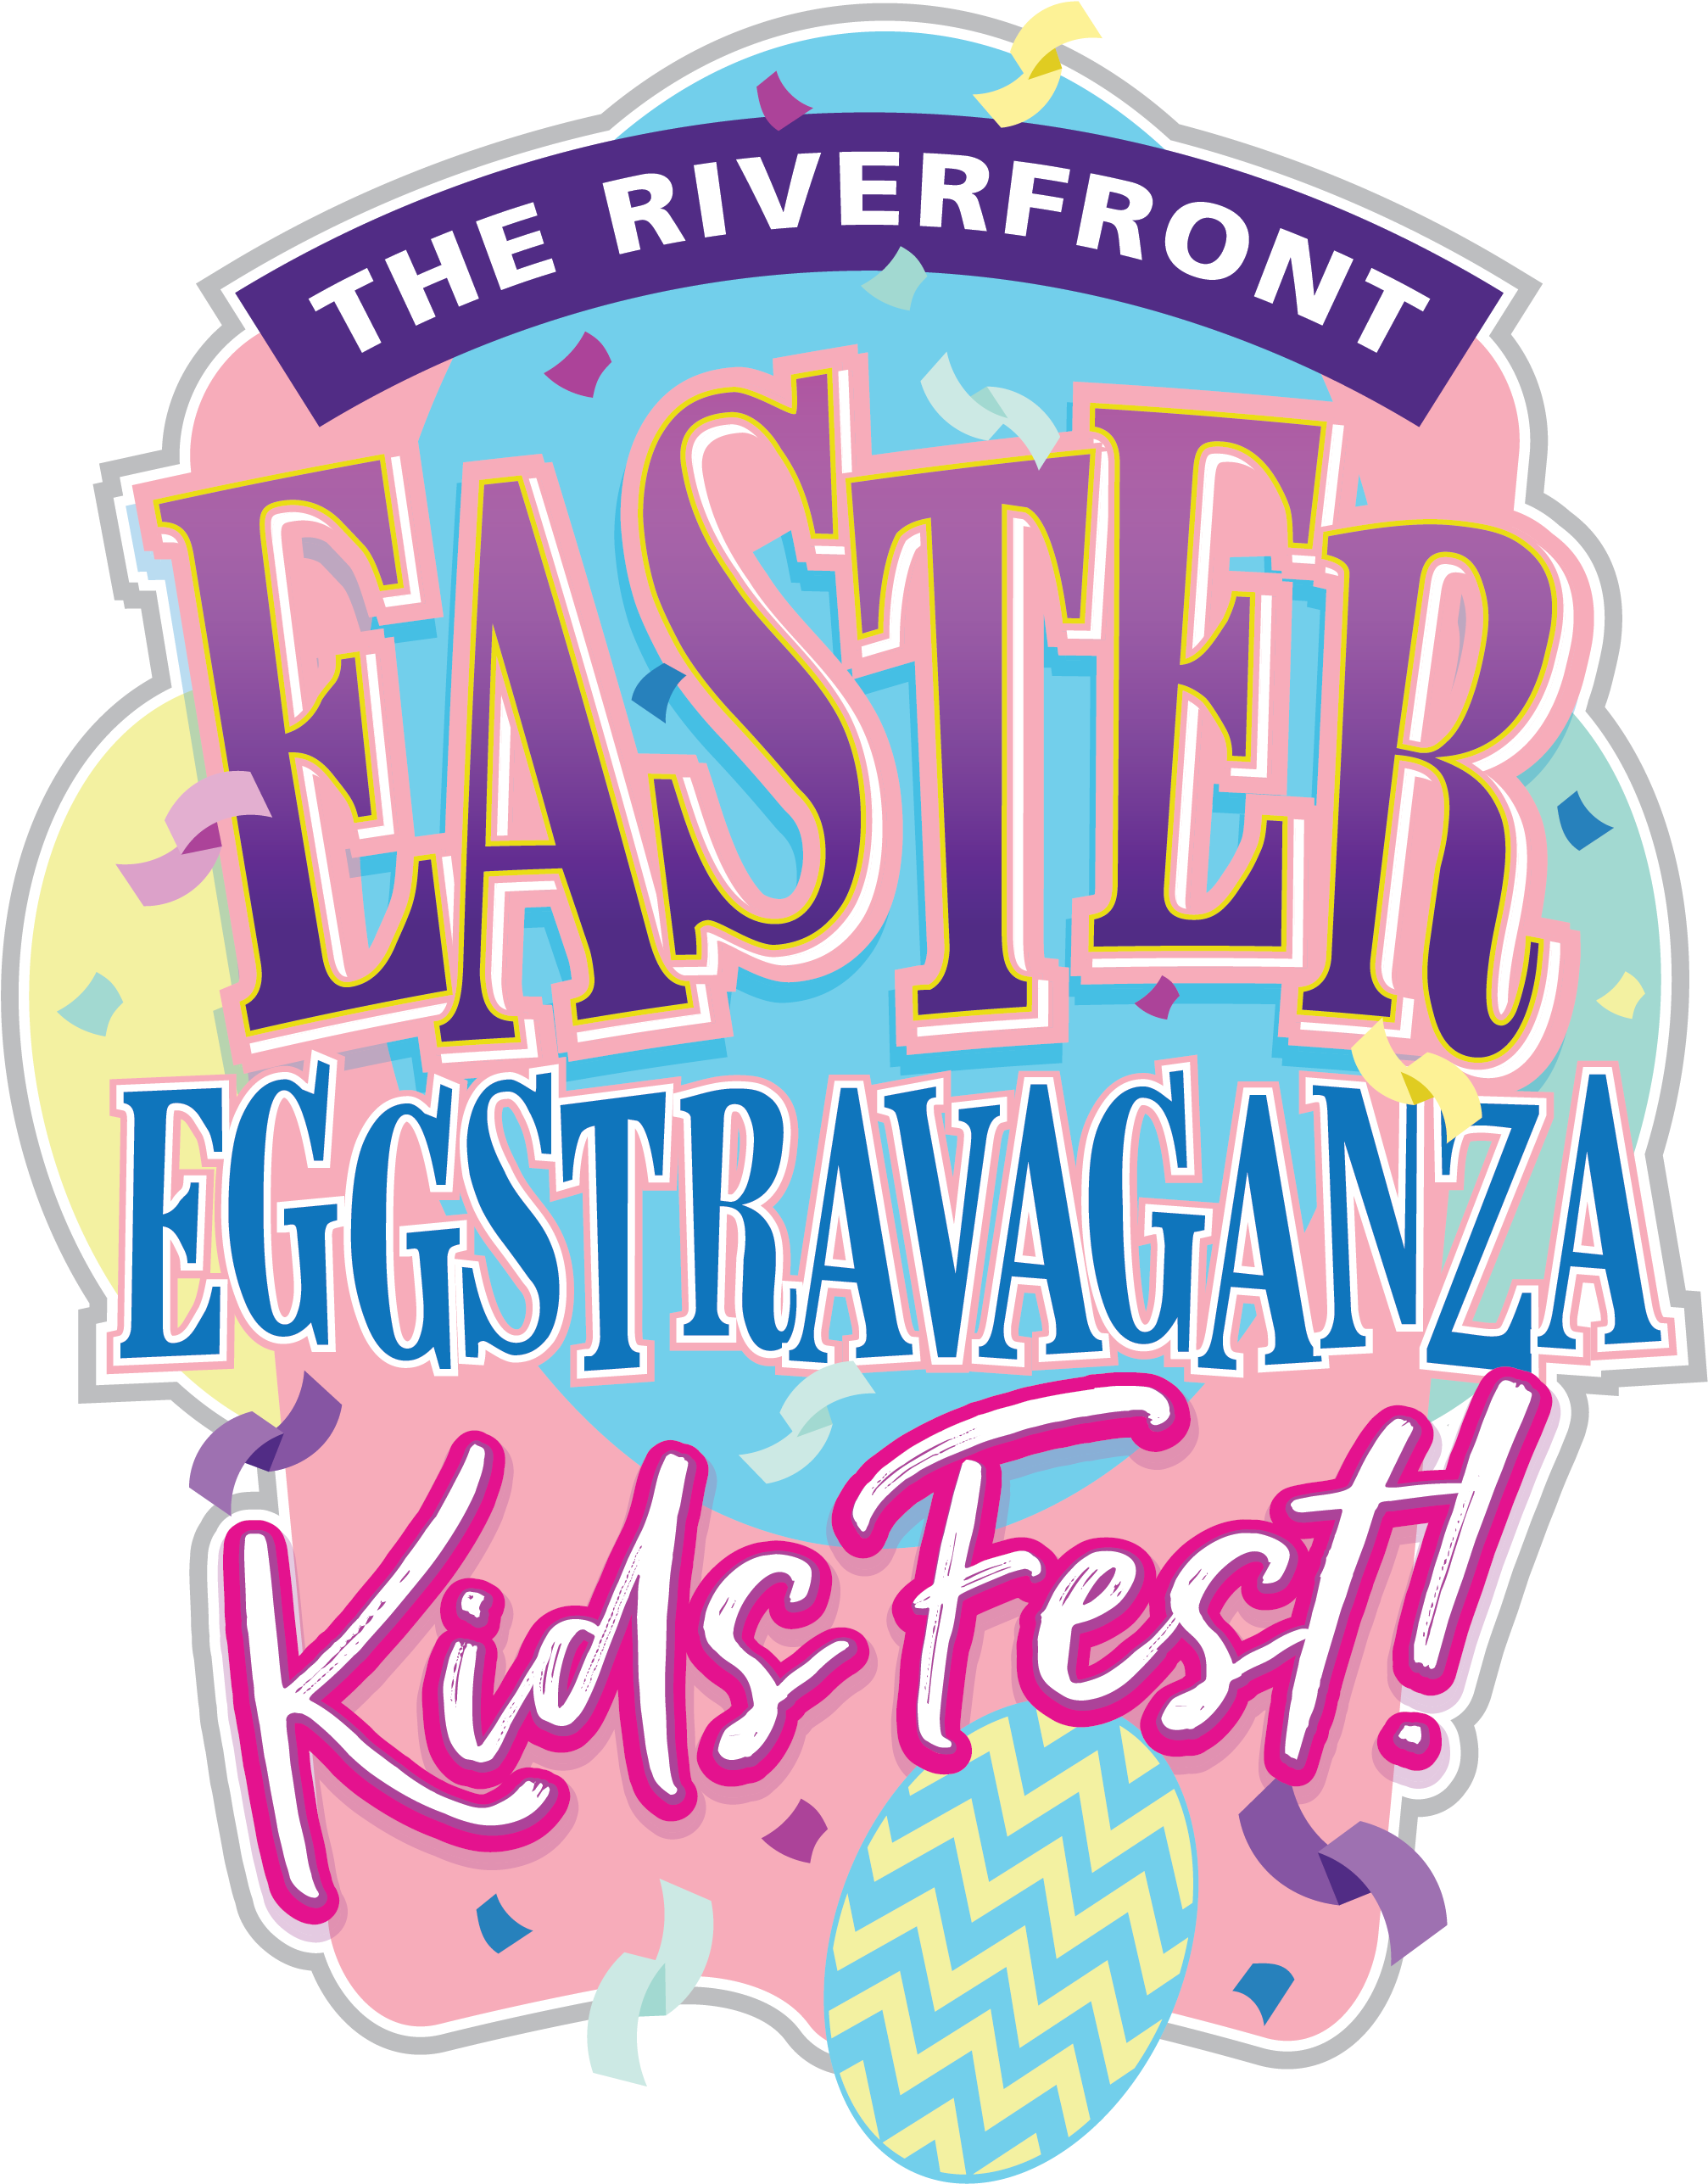 The 2018 Riverfront Easter Eggstravaganza Kids Fest - Painting (2550x3300)